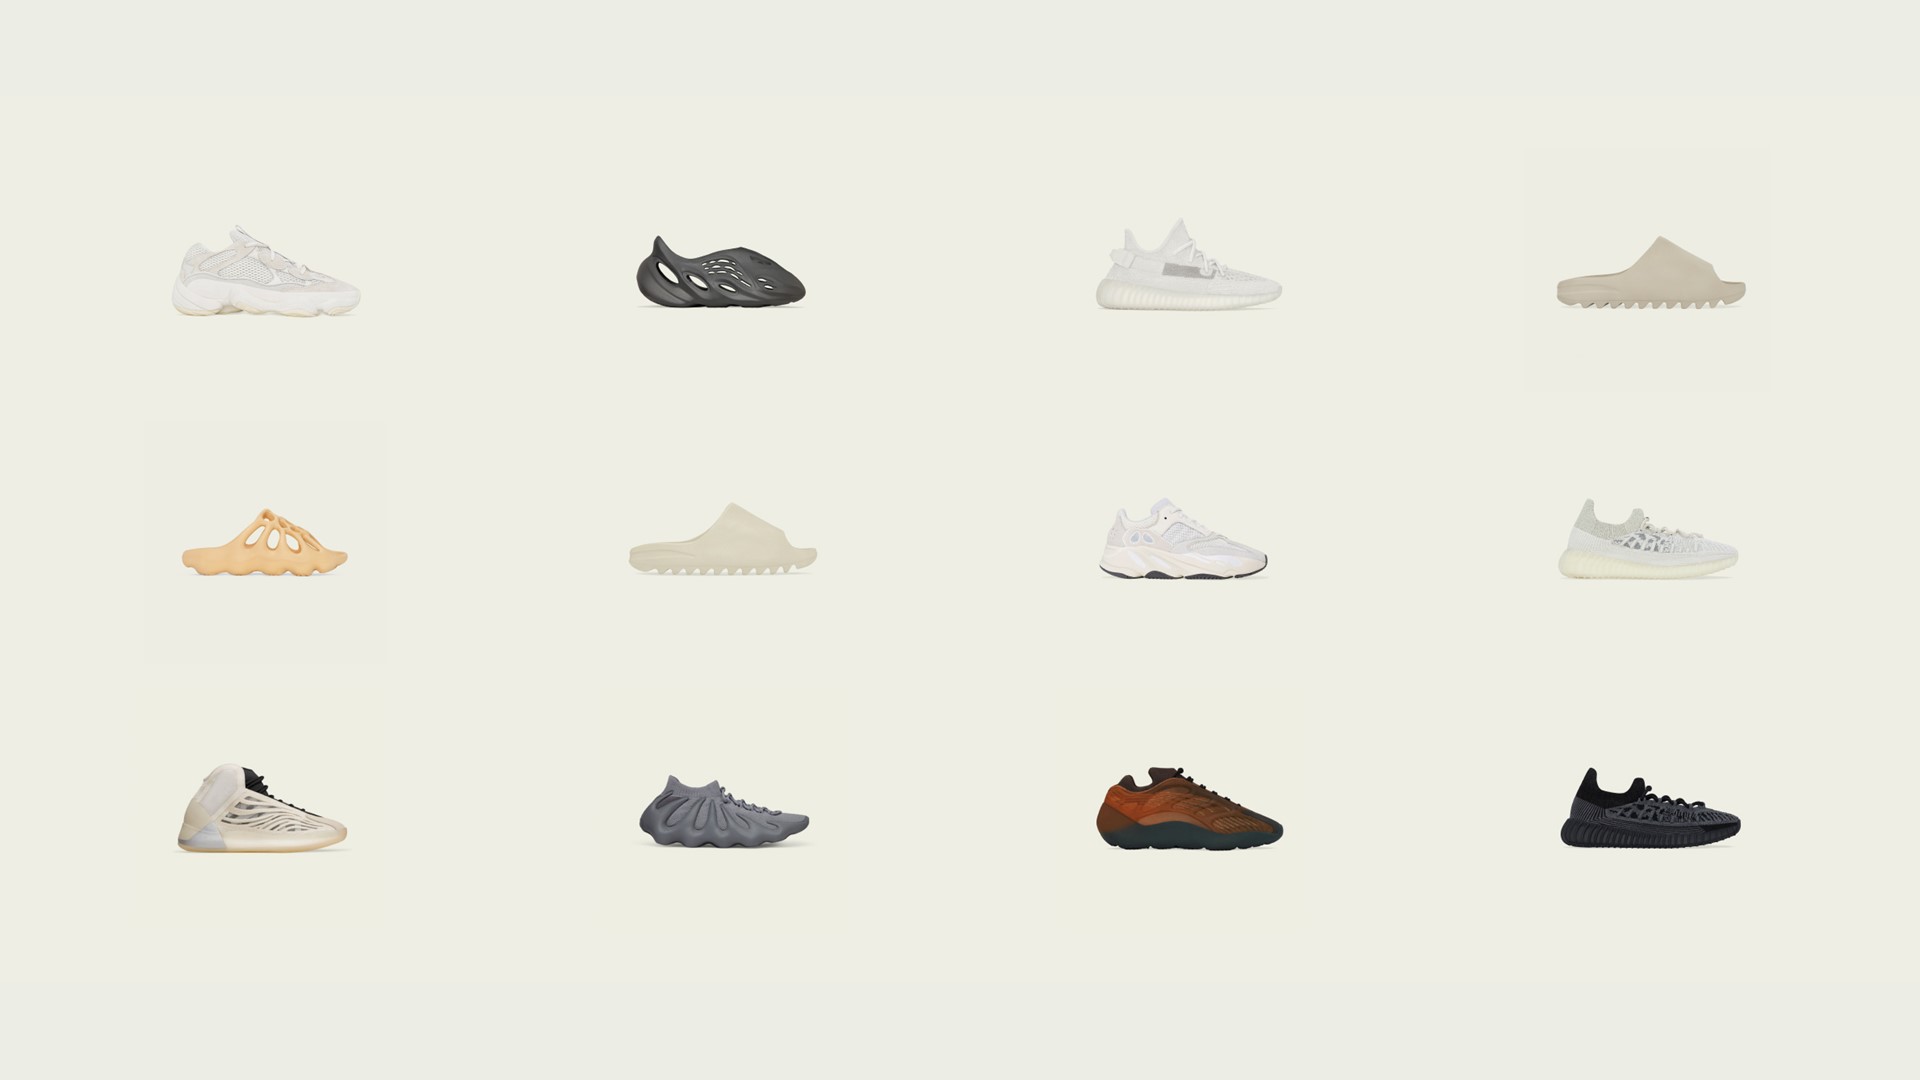 announces further release of existing Yeezy products in August with continued commitment to combatting discrimination and hate